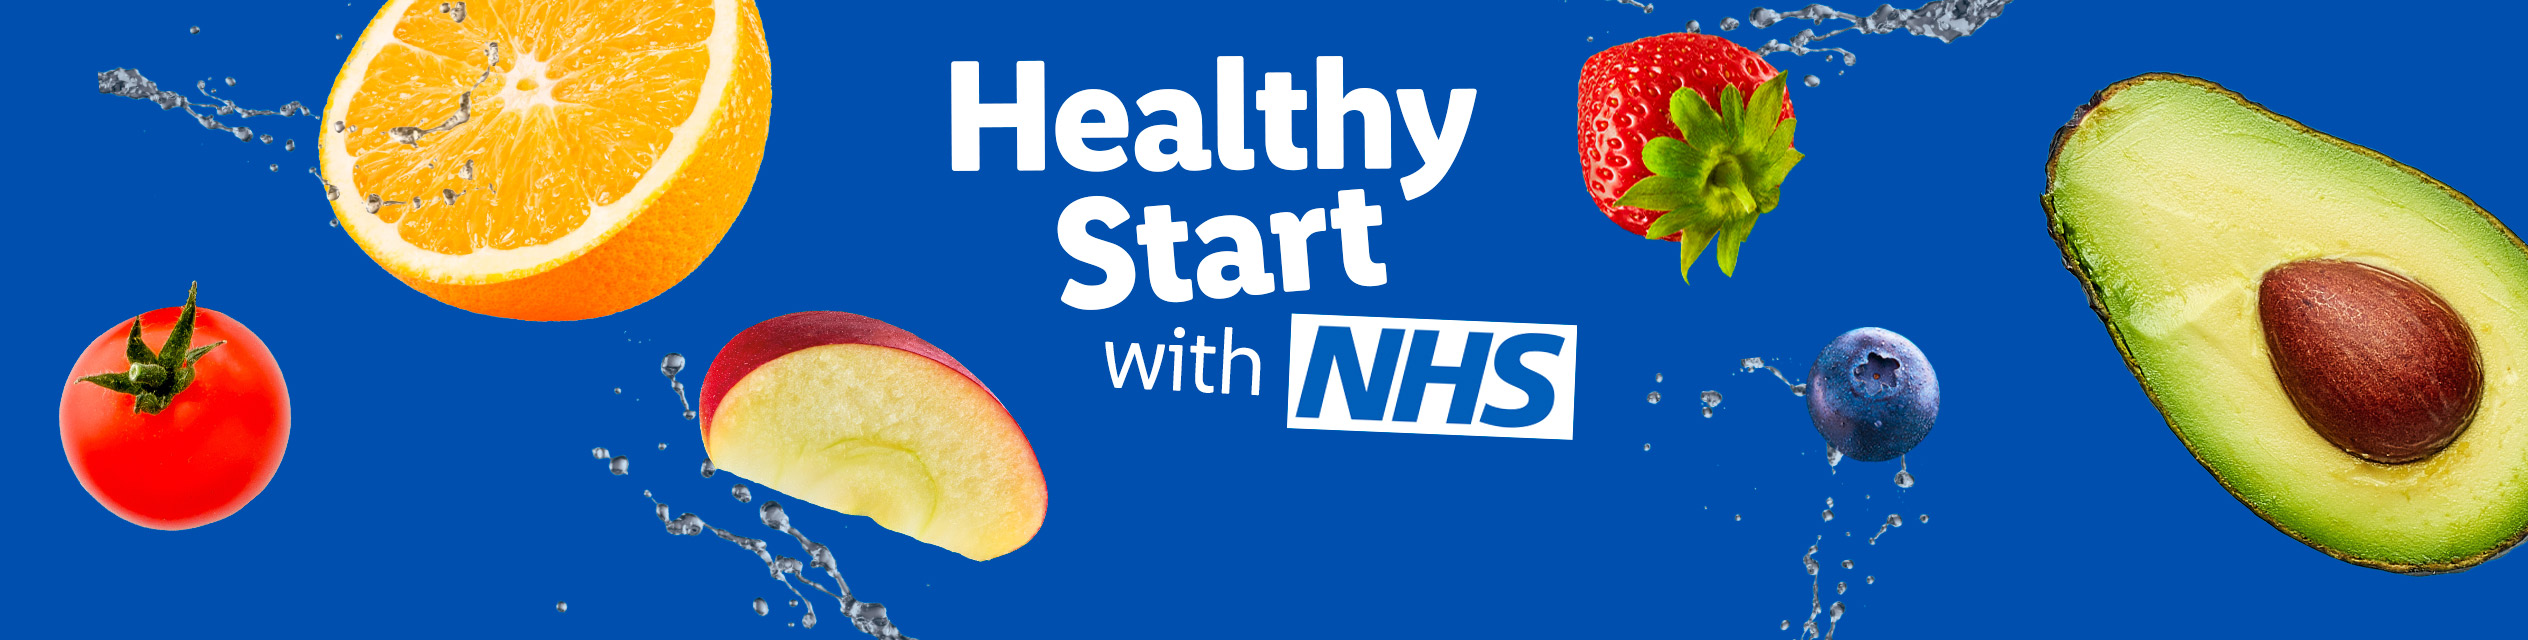 Healthy Start with NHS